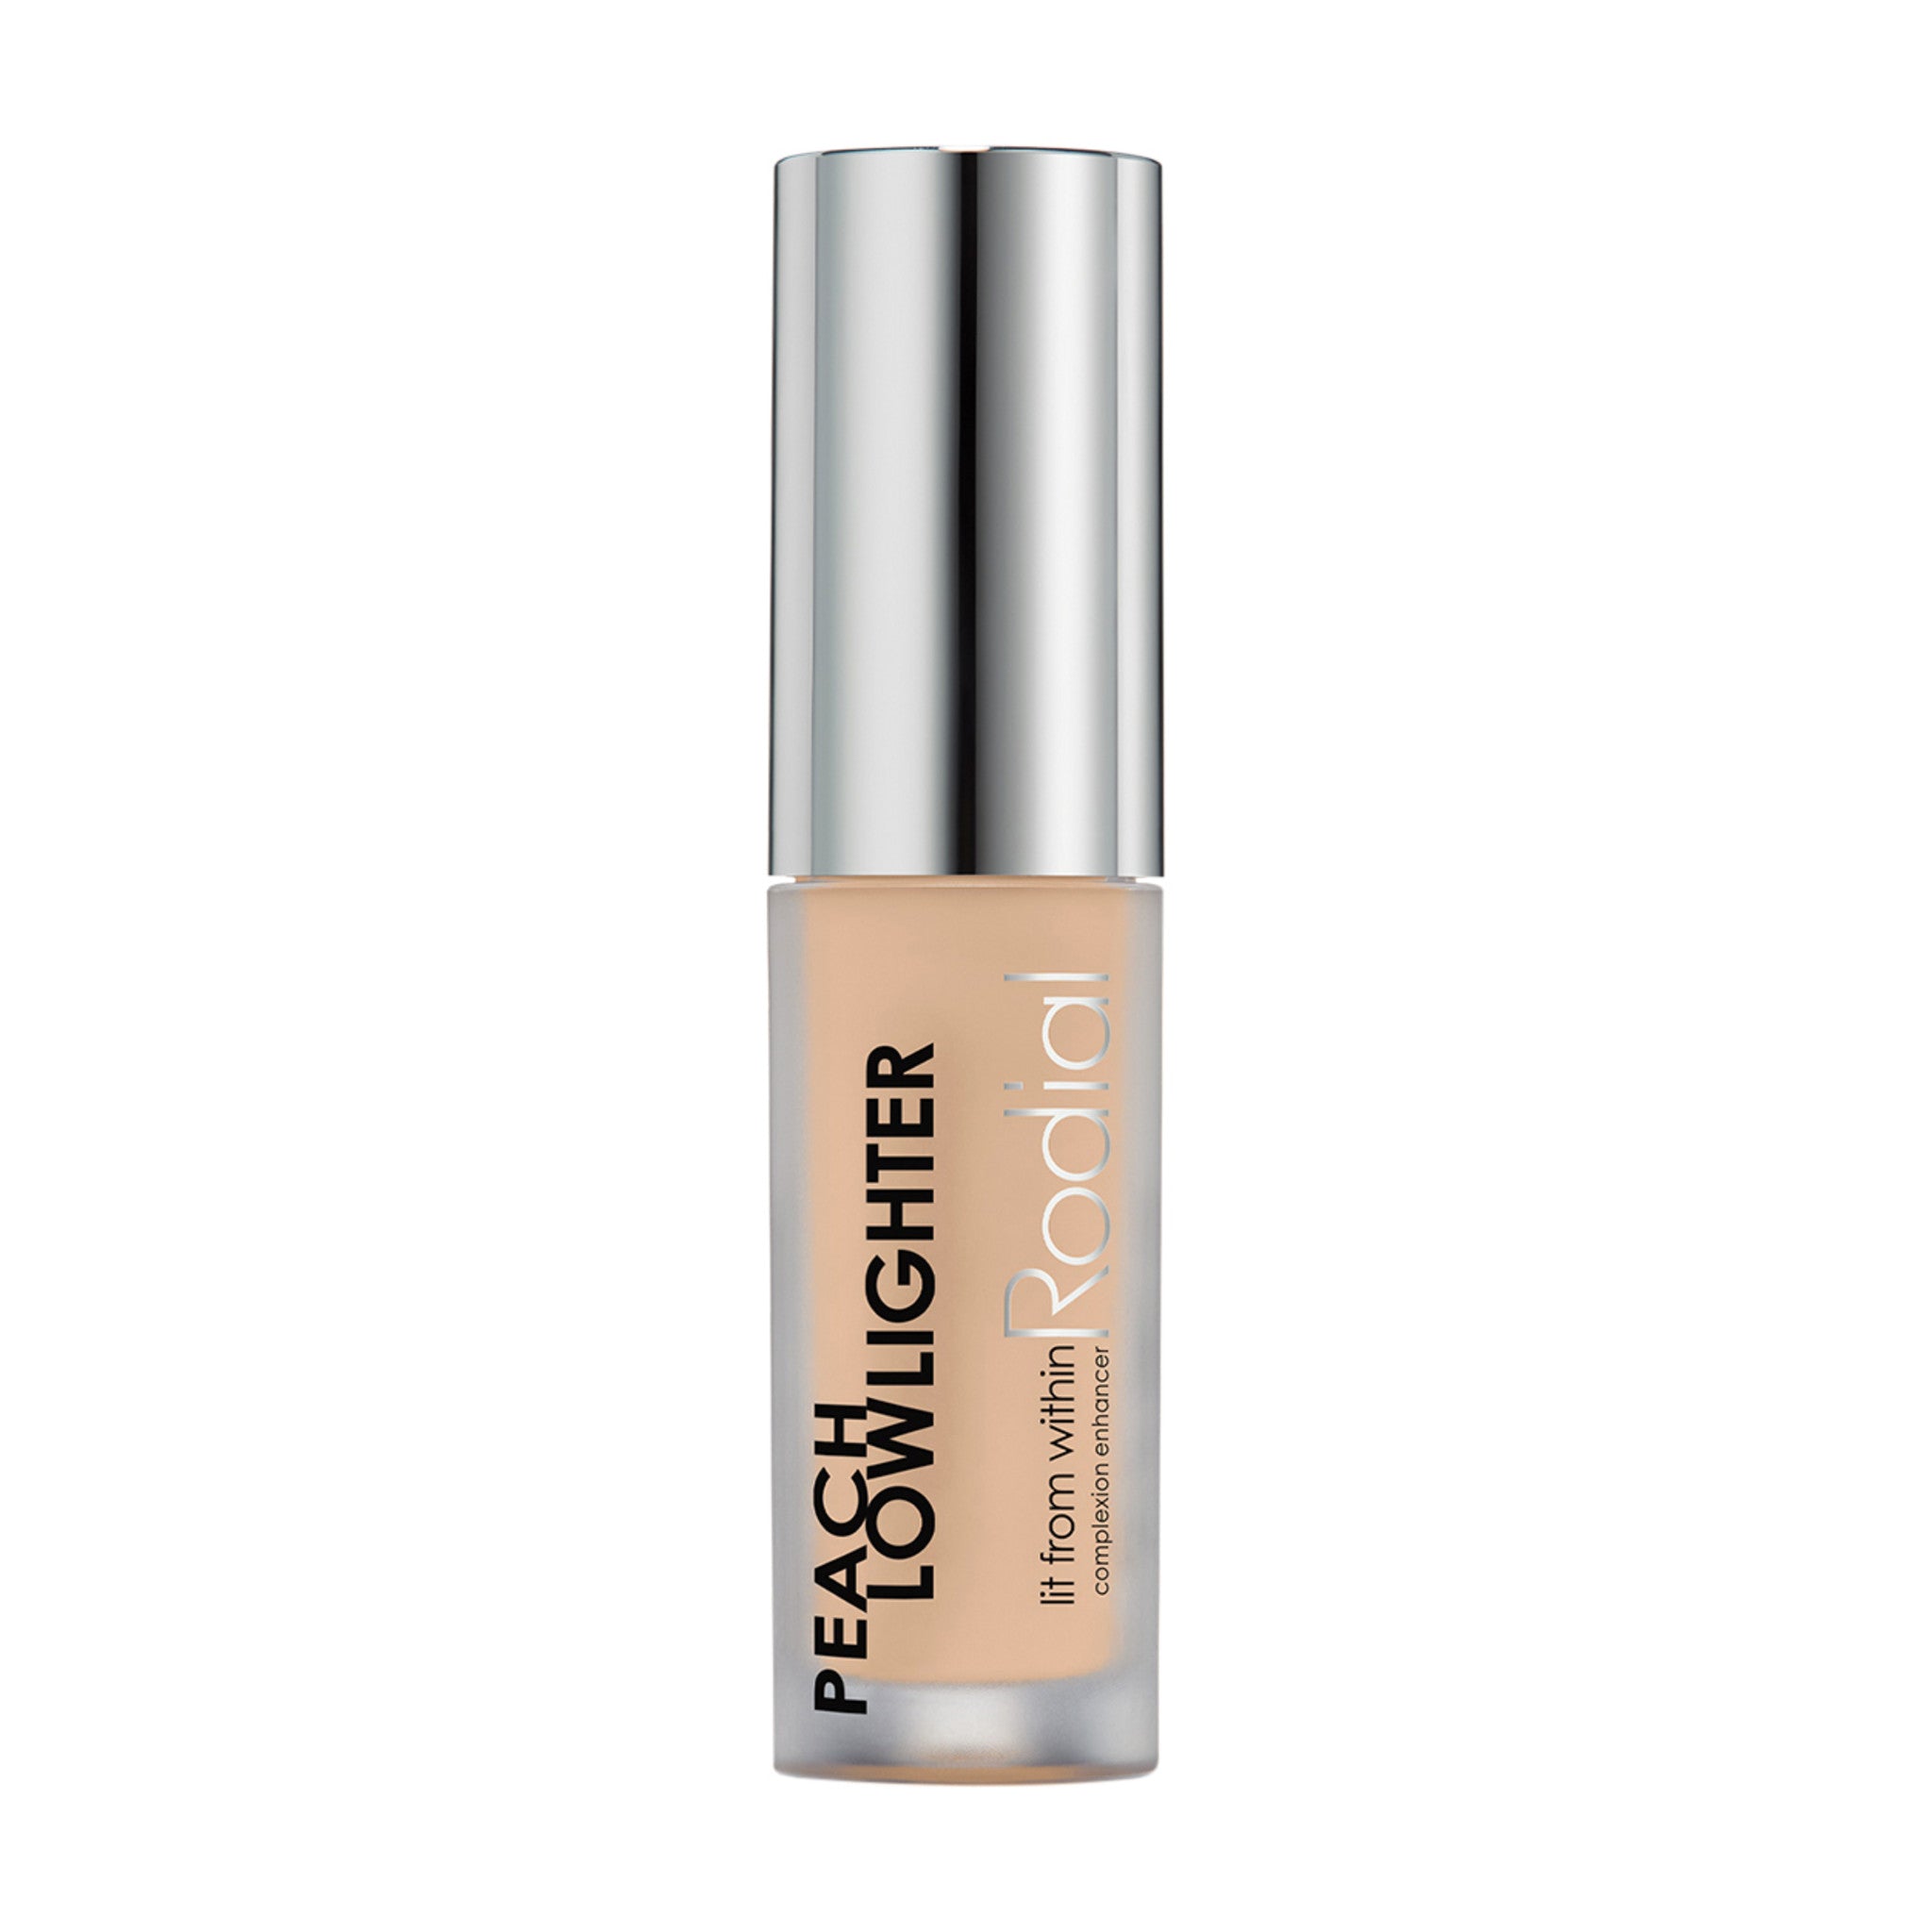 Rodial Peach Lowligher Size variant: 1.6 ml main image. This product is in the color nude, for medium neutral beige complexions